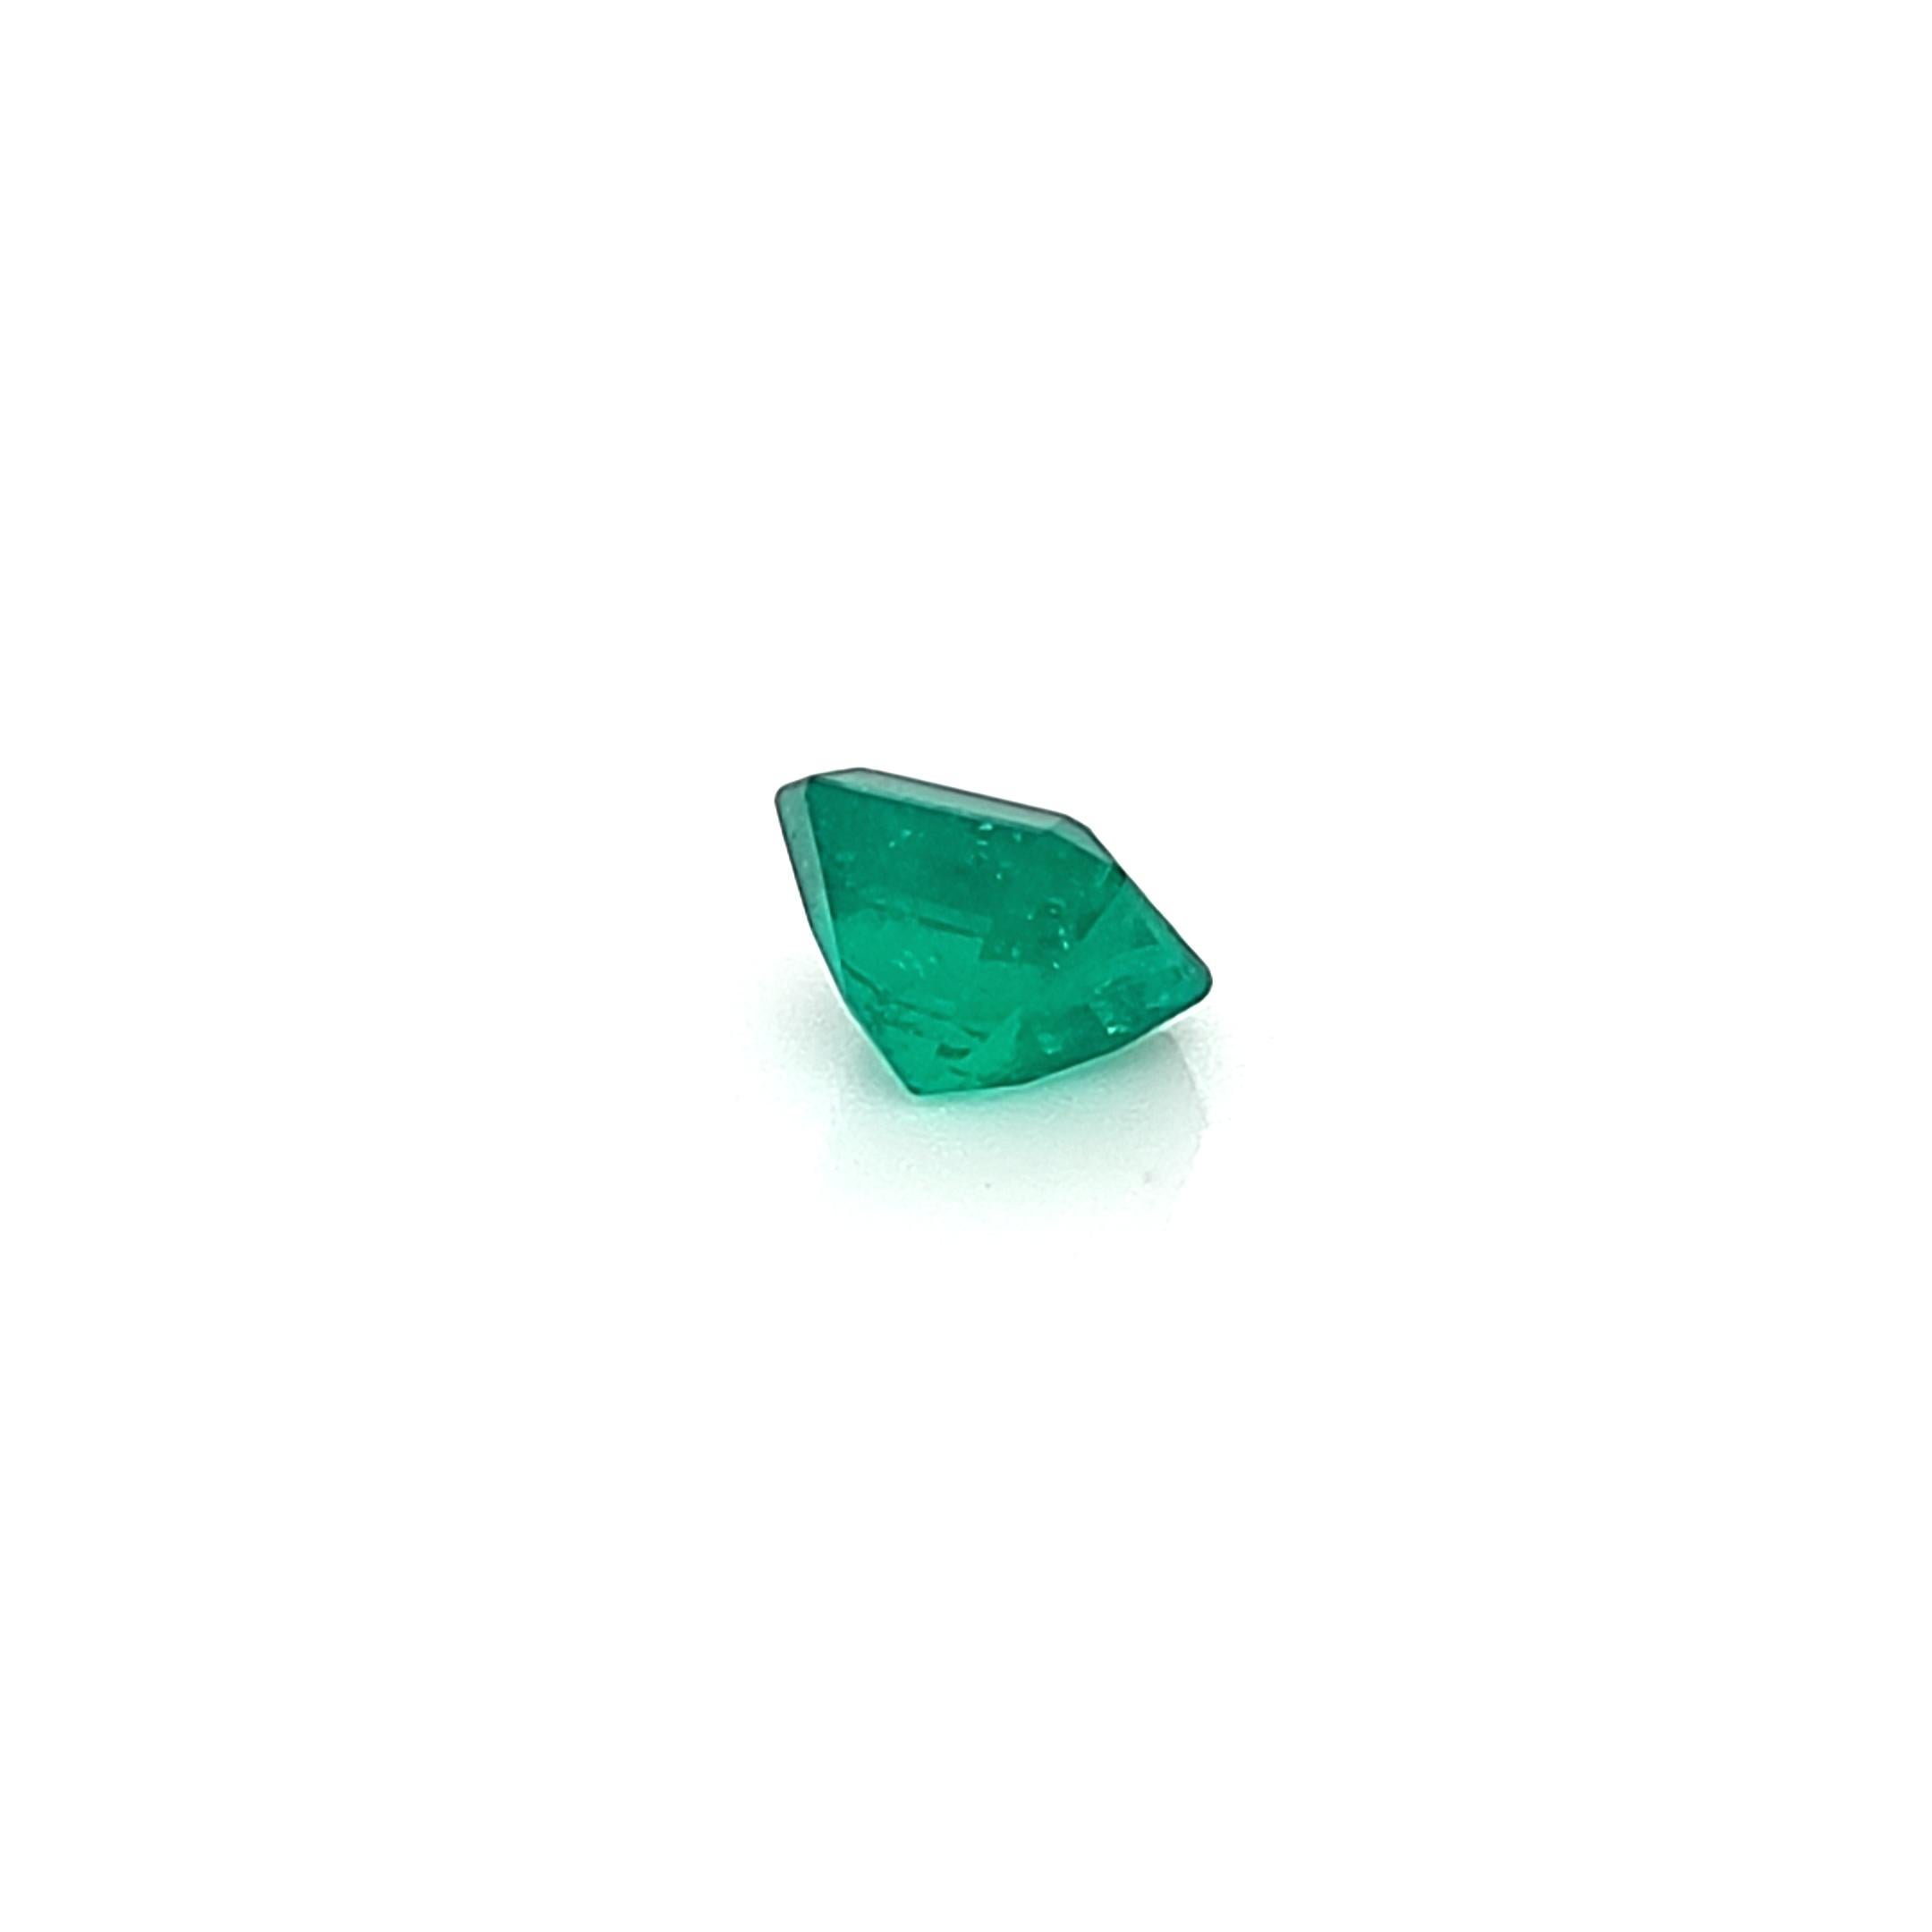 Octagon Cut Colombian Octagonal Step Cut Emerald 1.55 TCW GIA Certificate For Sale